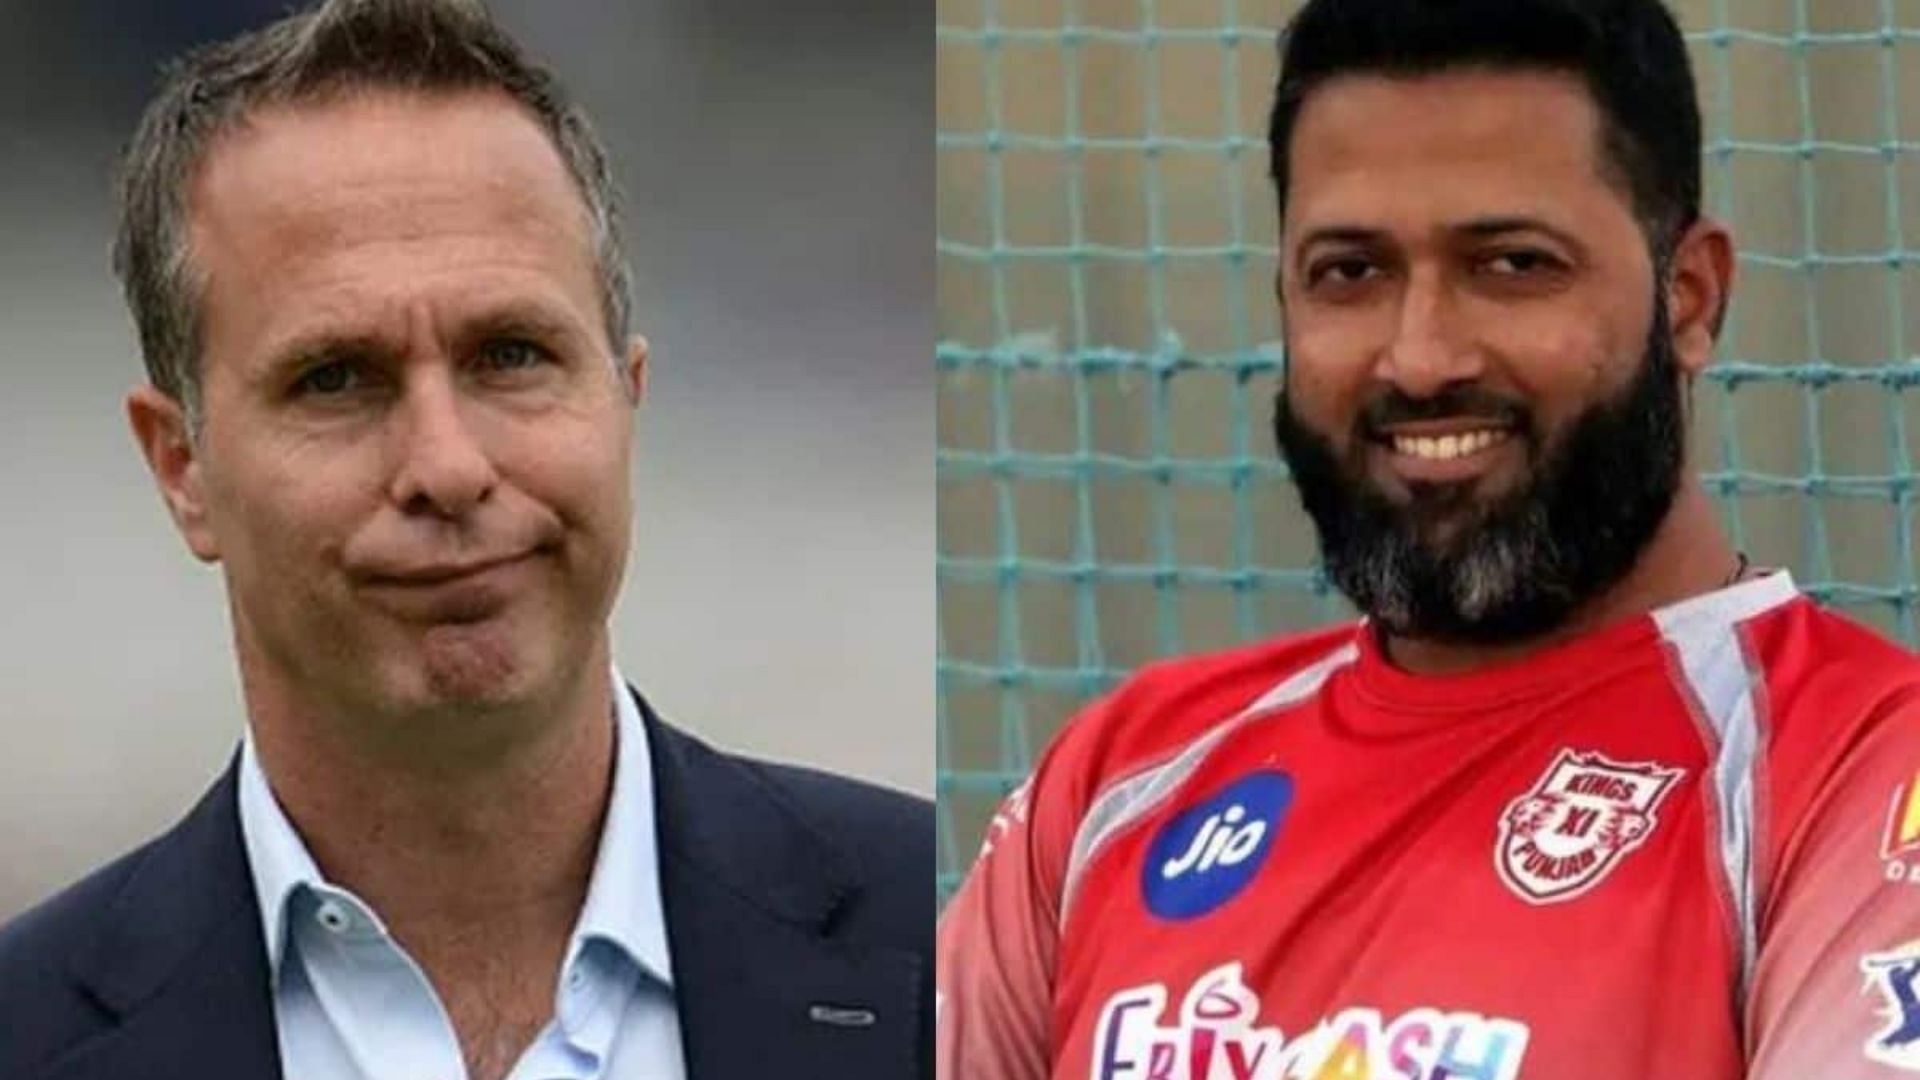 Michael Vaughan (L) was once again trolled by Wasim Jaffer (P.C.:X)